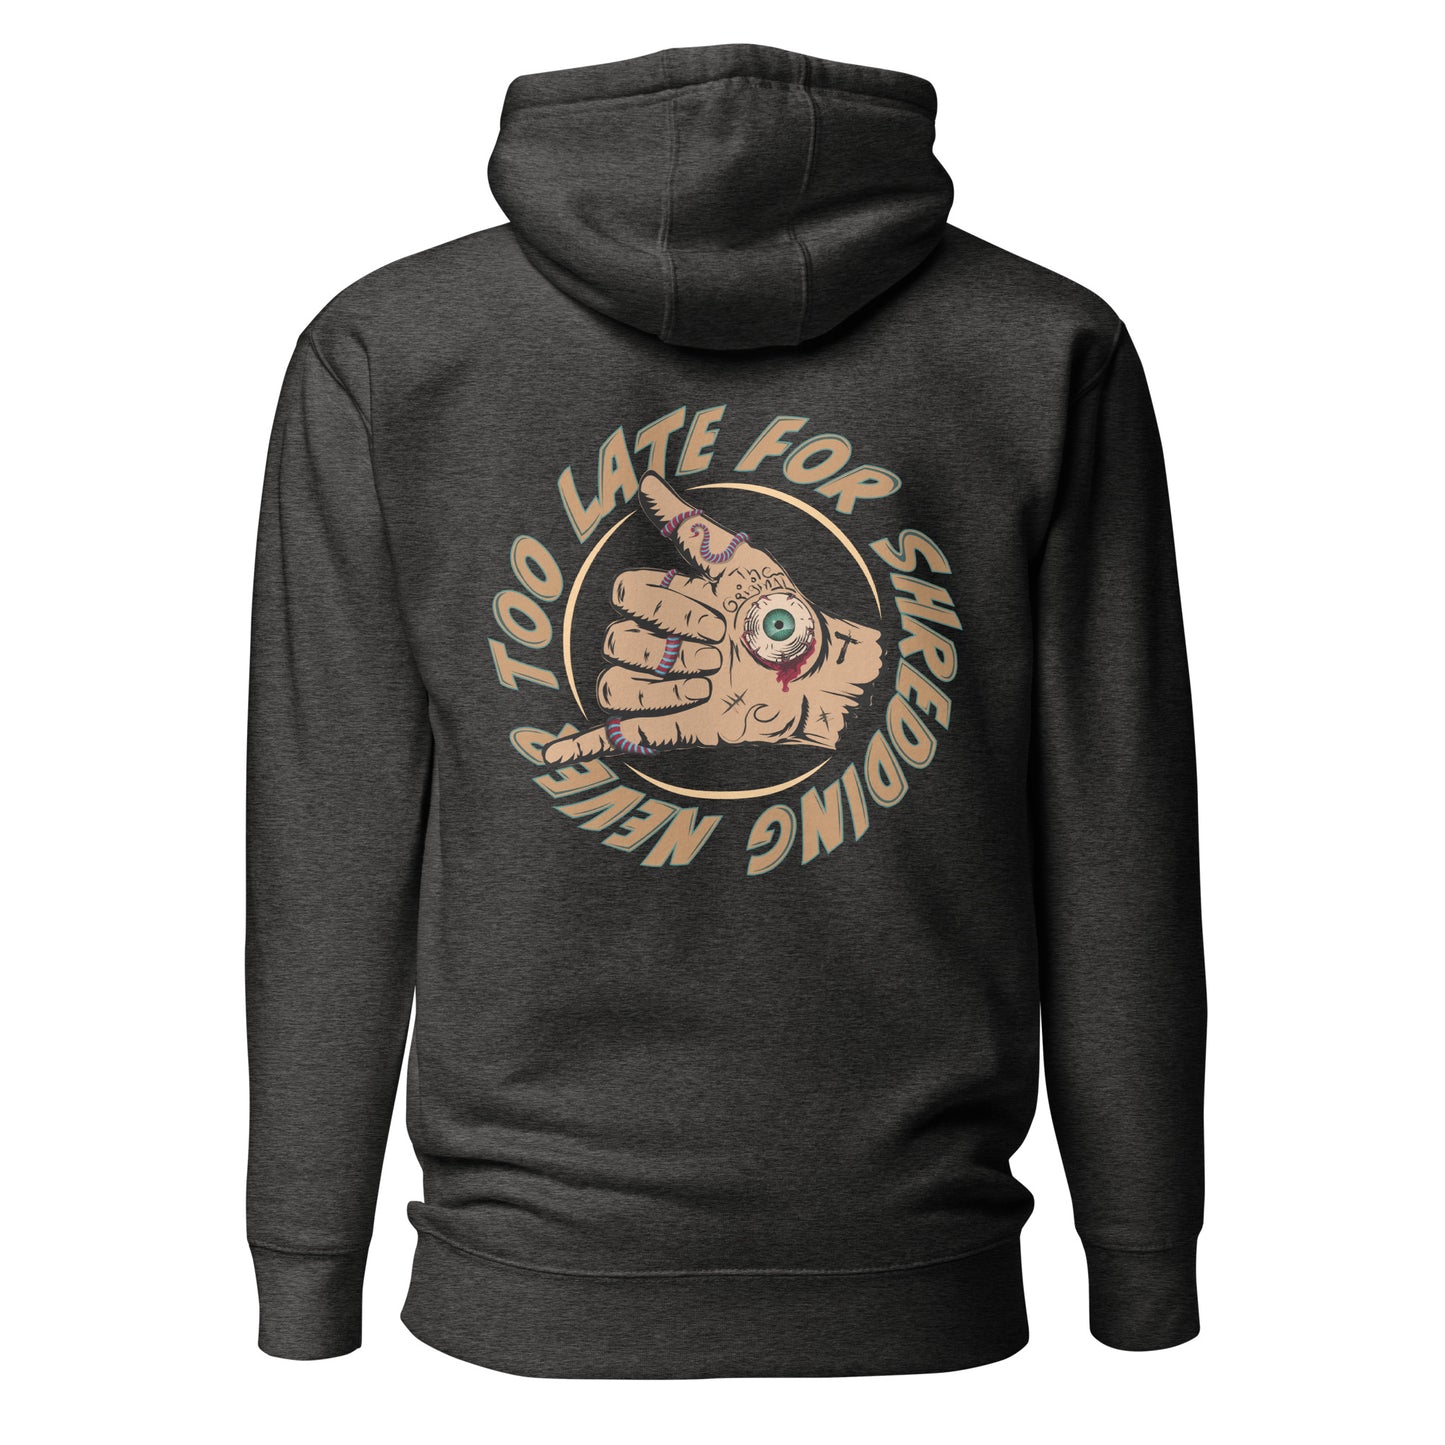 Hoodie charcoal heather unisex dos Never Late for Shredding, main shaka surfing